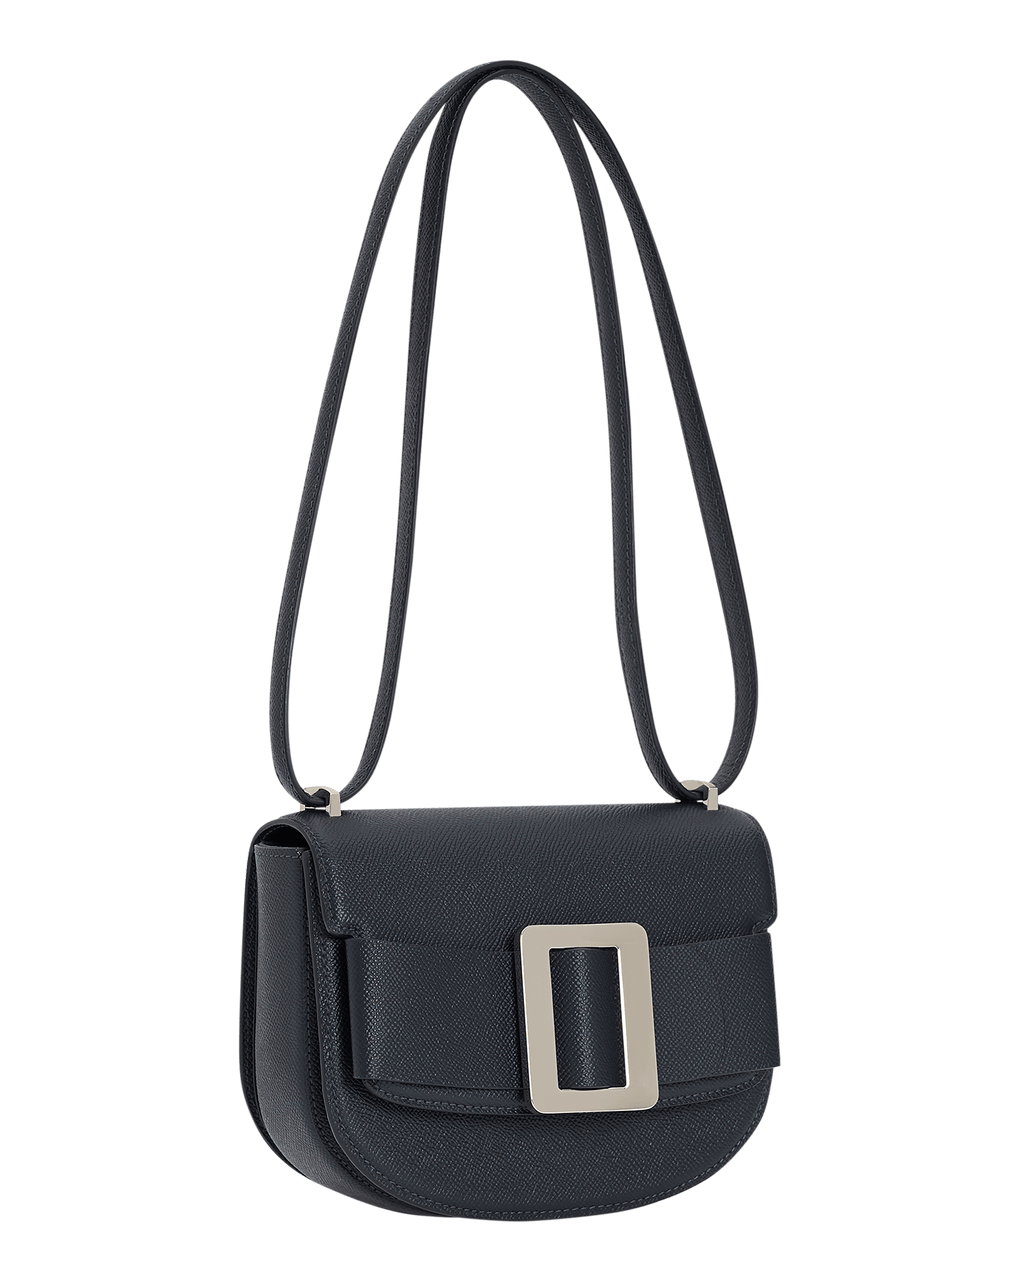 Small, blue grained leather handbag, a large silver buckle on the front flap closure, and a shoulder strap